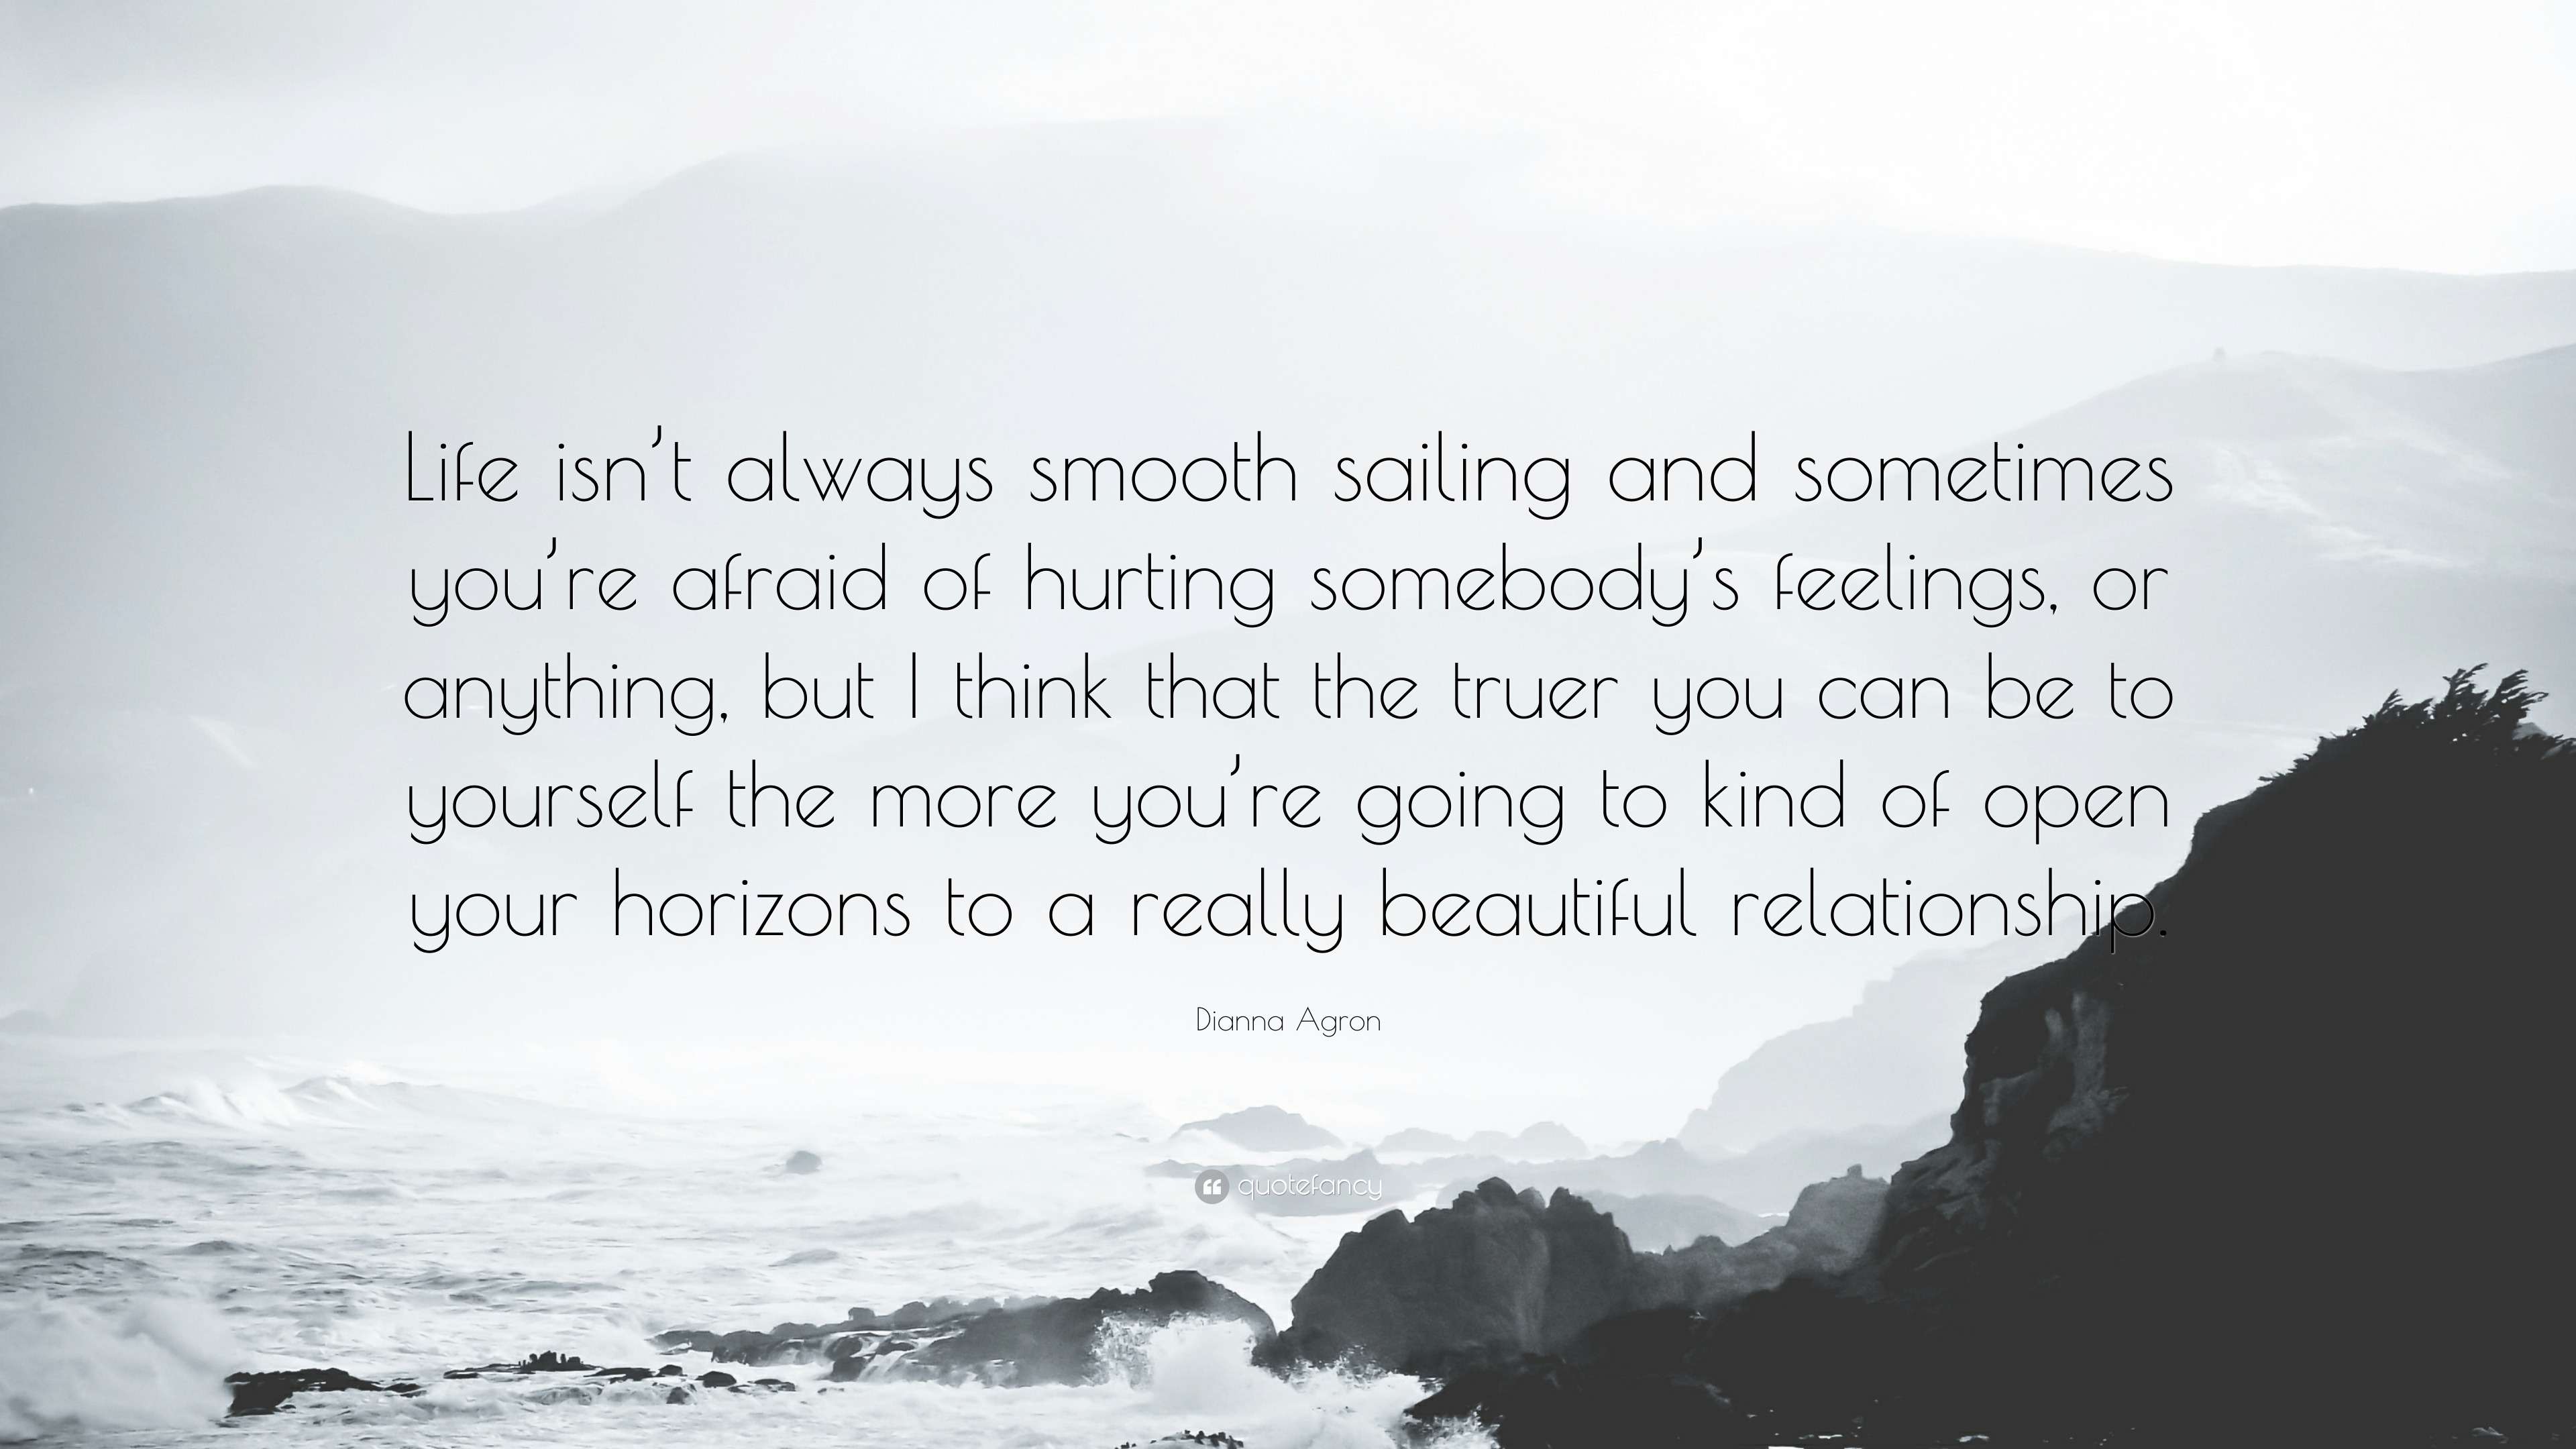 Dianna Agron Quote: “Life isn't always smooth sailing and